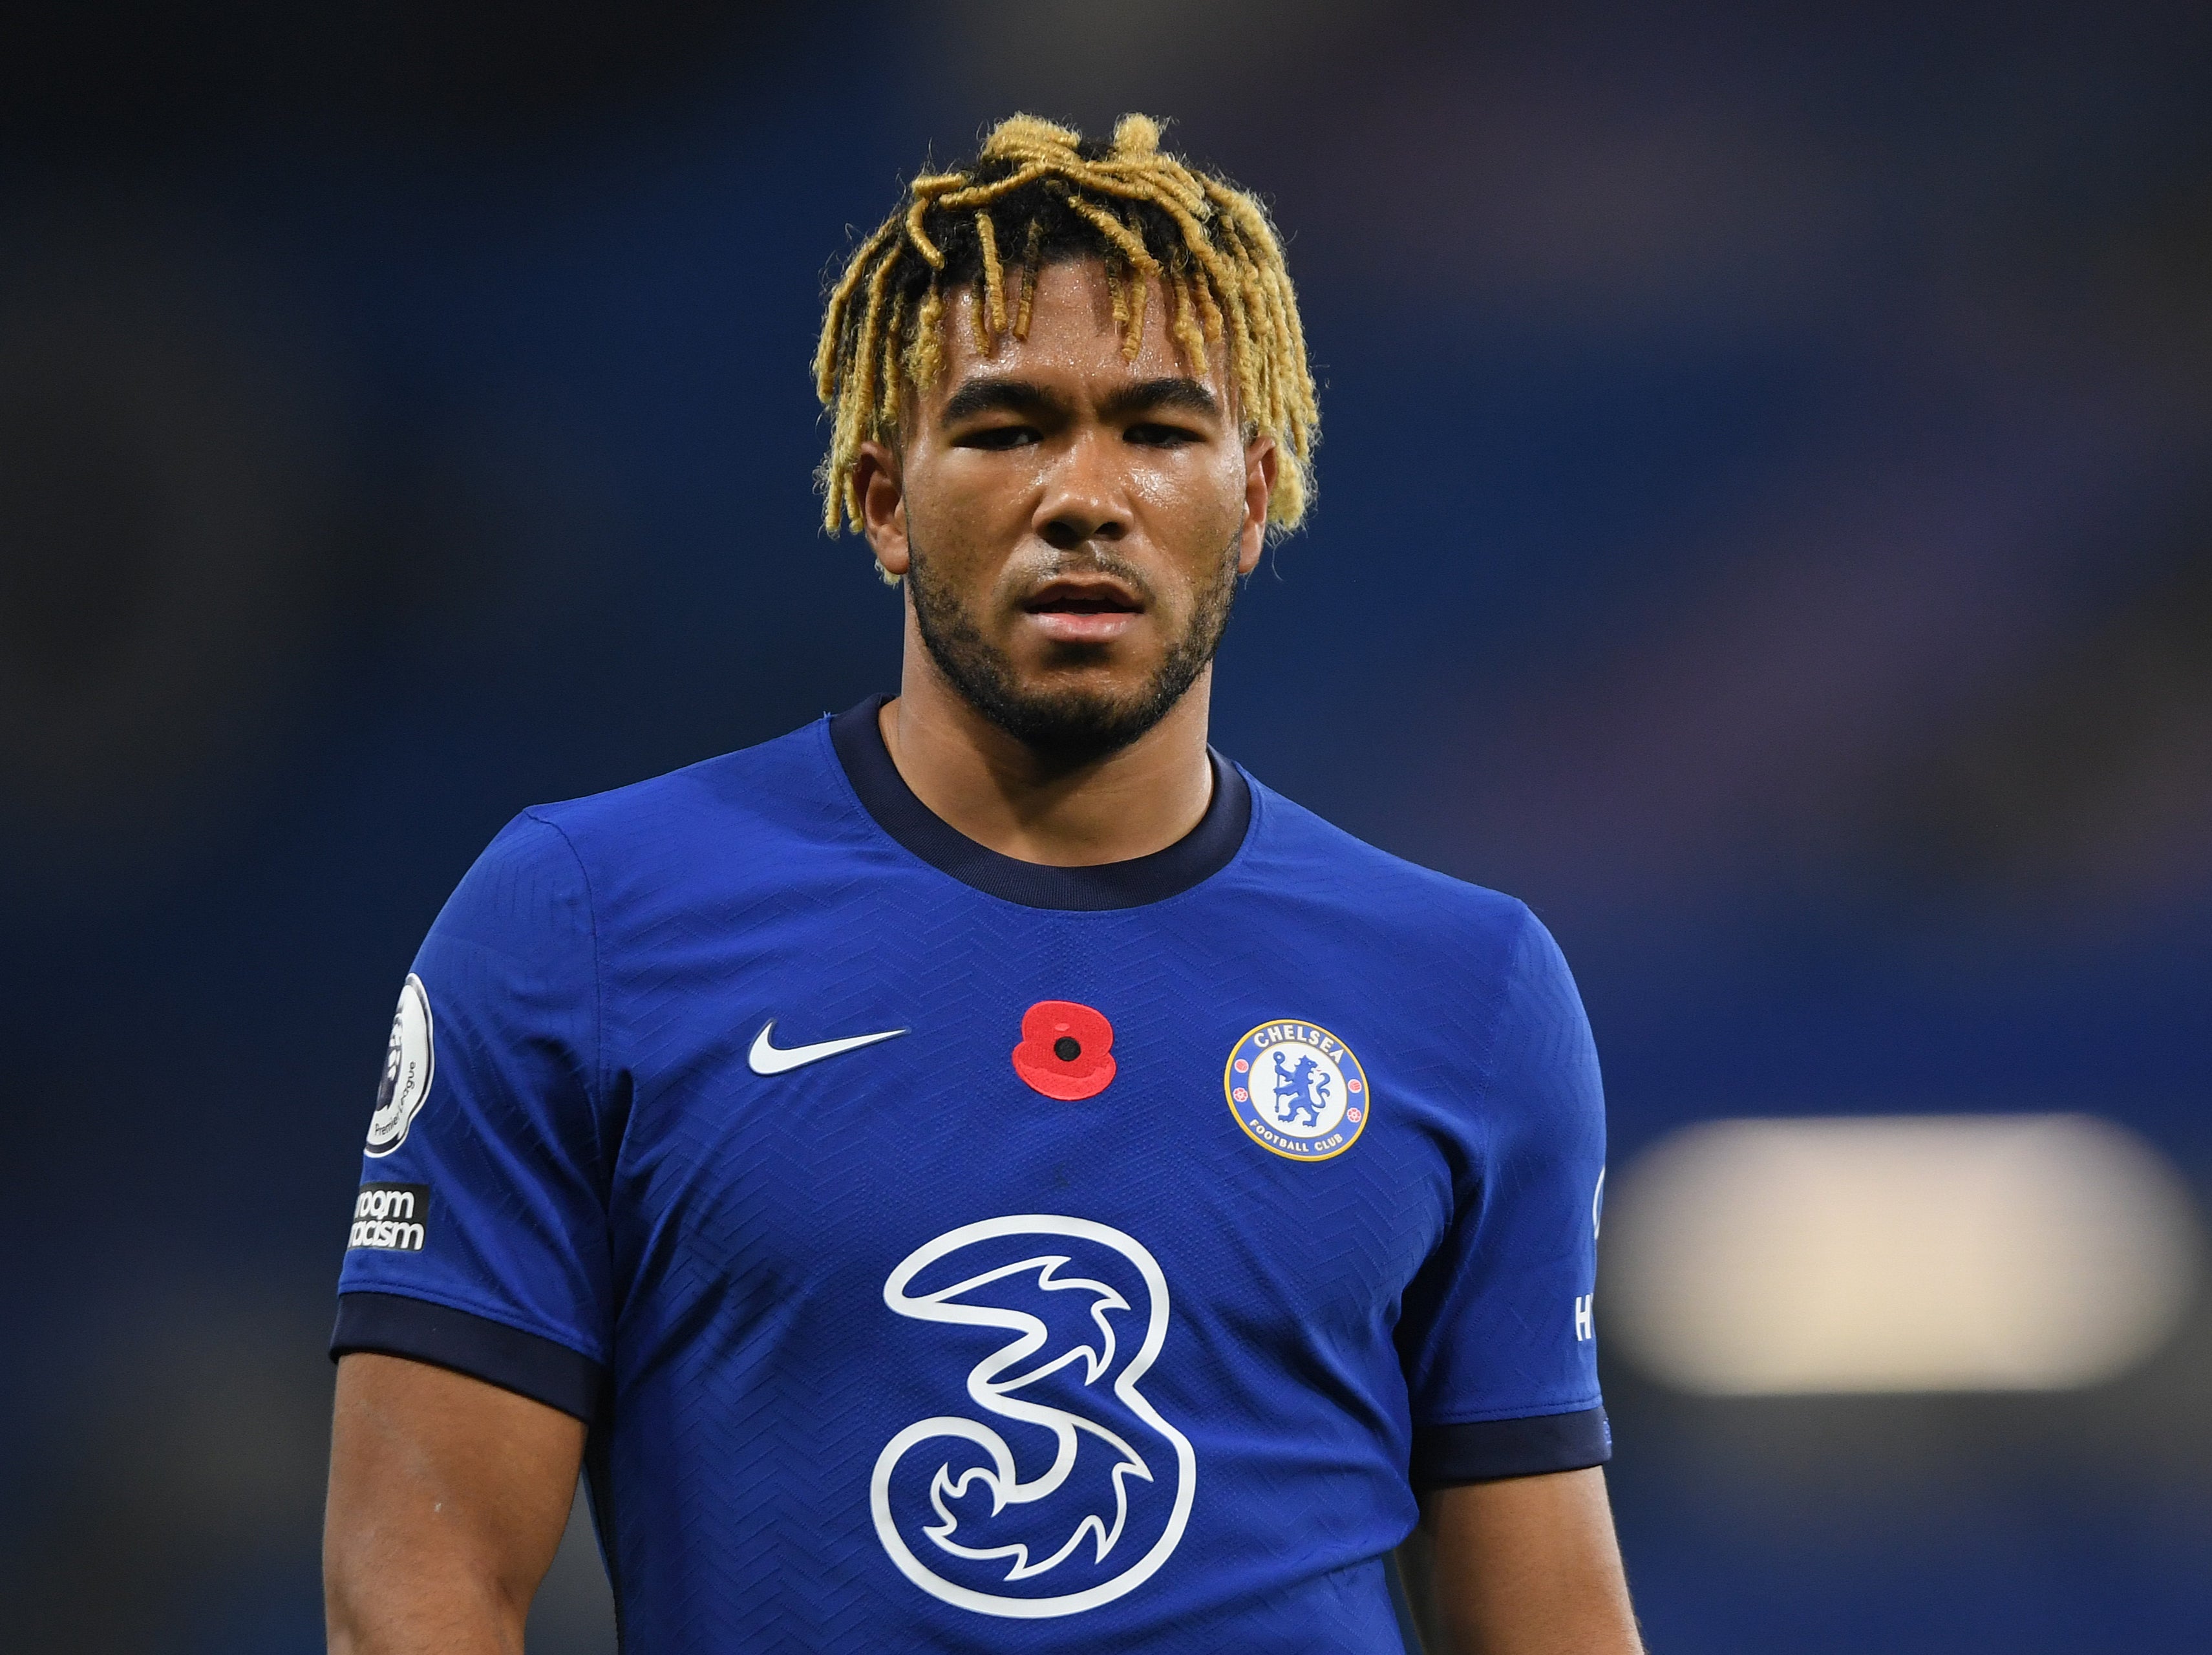 Chelsea and England defender Reece James, 21